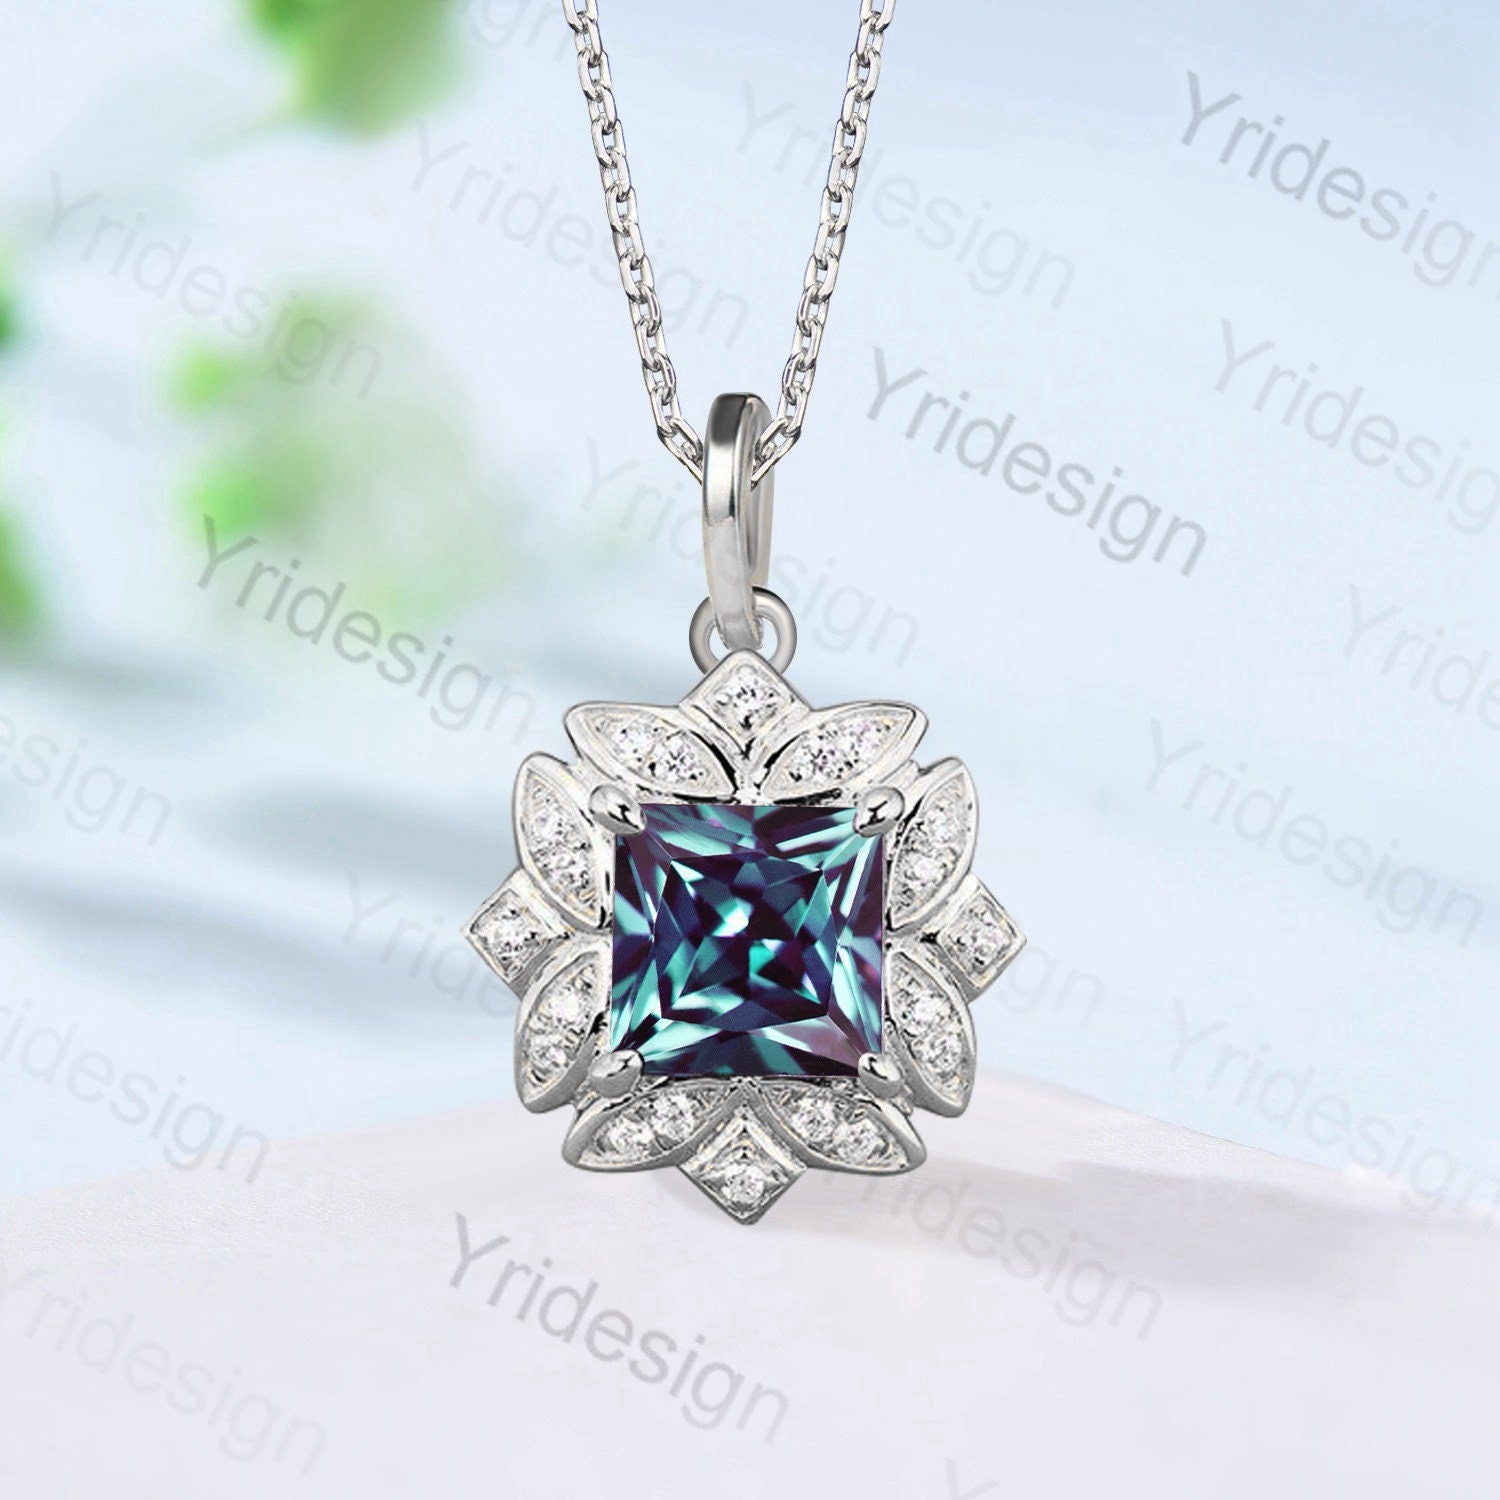 Vintage 2CT Princess Alexandrite Pendant Necklace June Birthstone Floral Color changing  Pendant Necklace Cute Anniversary Gift for Women - PENFINE